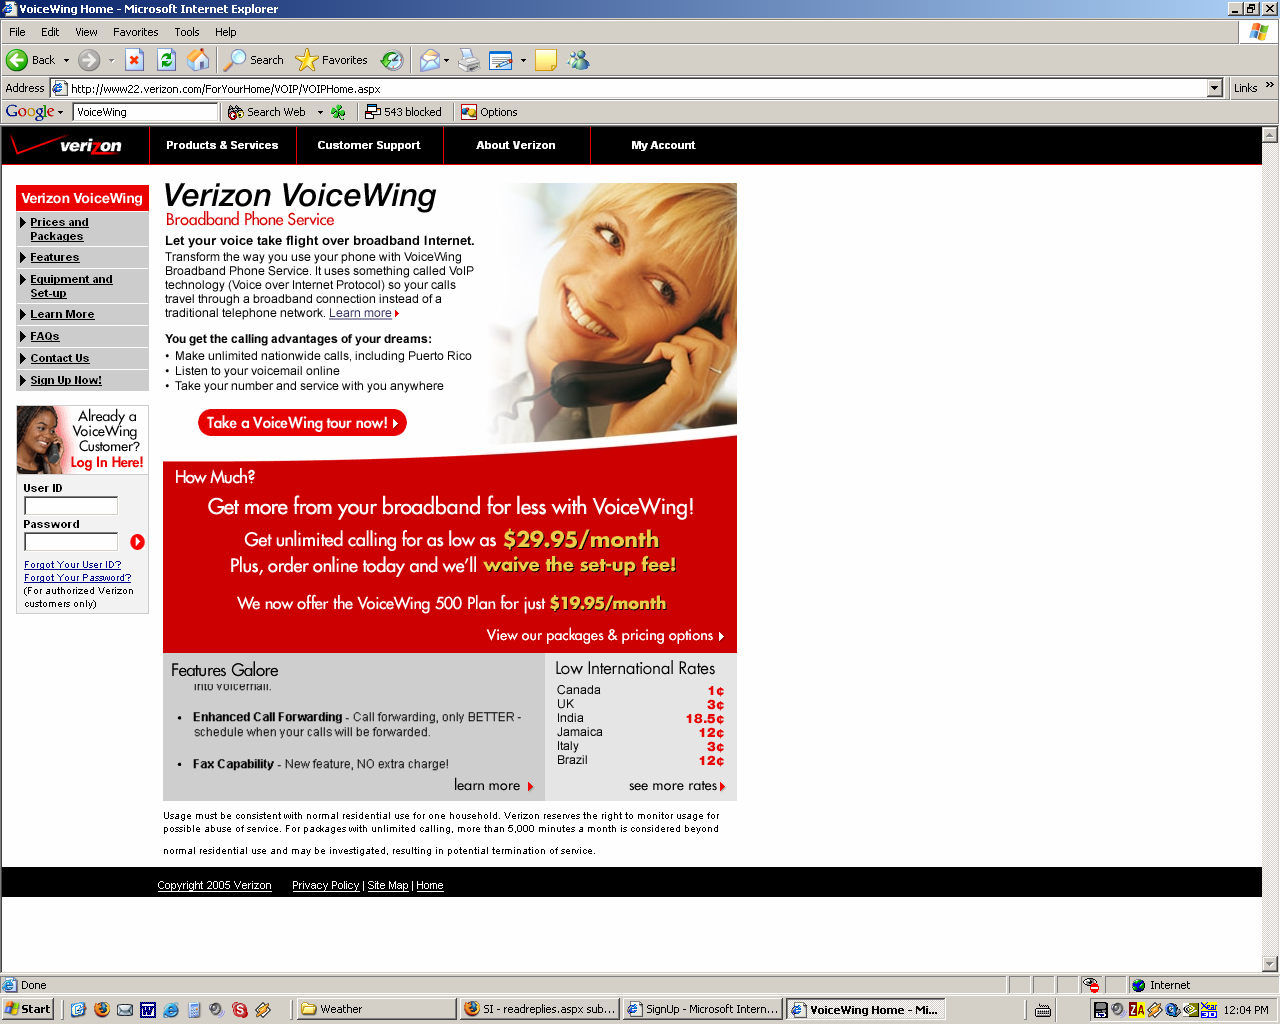 Screen shot of the Verizon VoiceWing home page.